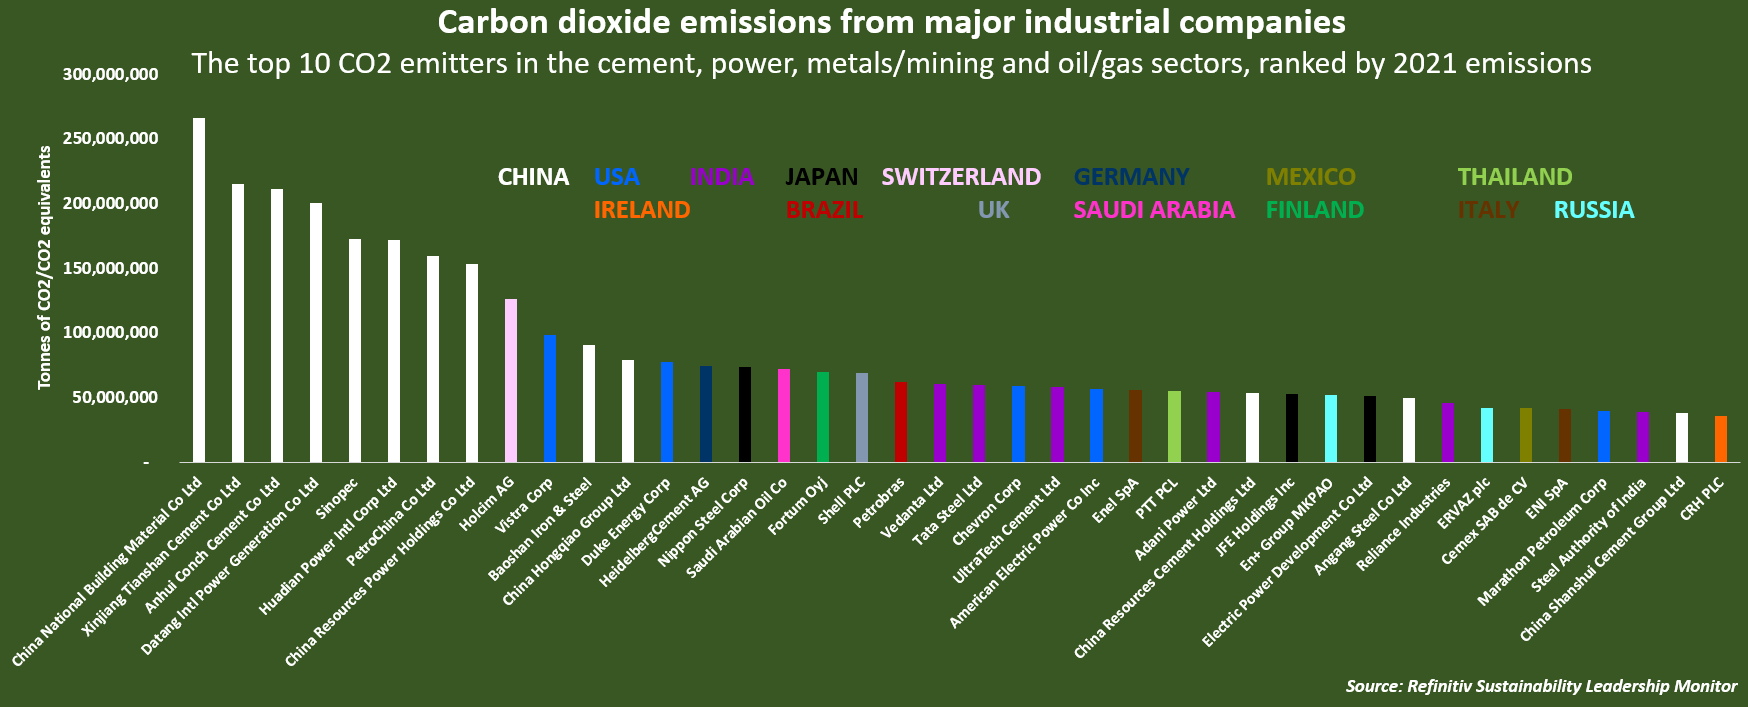 Top CO2 emitters by company and country